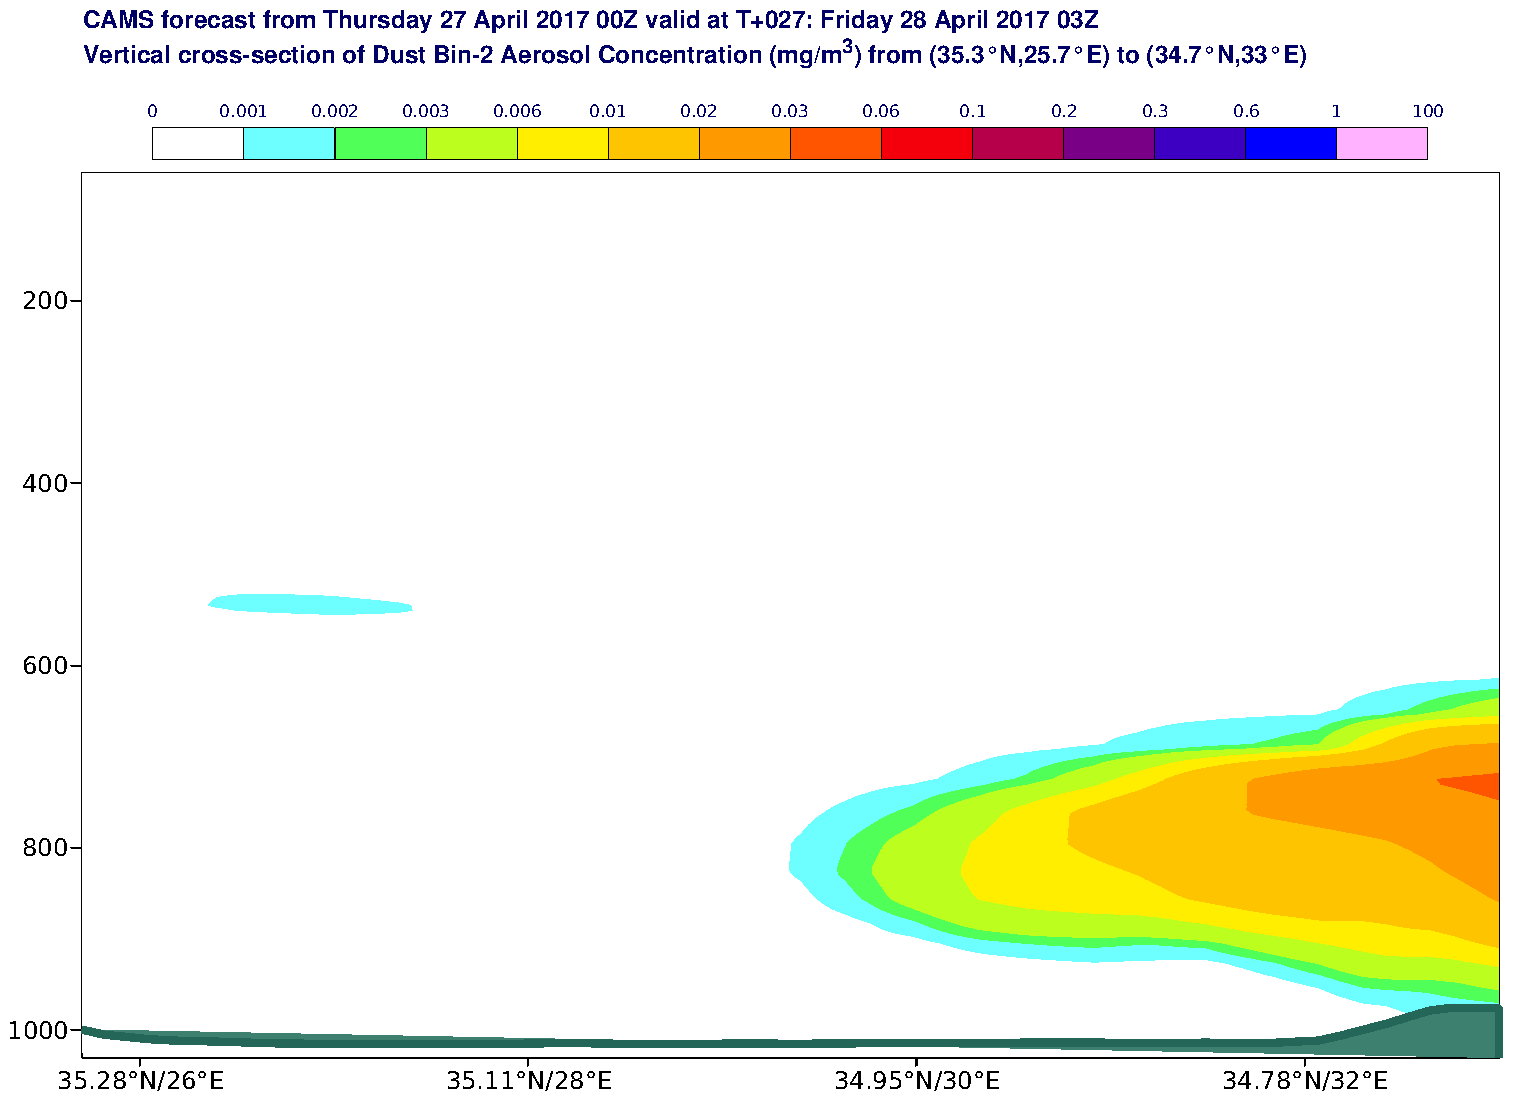 Vertical cross-section of Dust Bin-2 Aerosol Concentration (mg/m3) valid at T27 - 2017-04-28 03:00